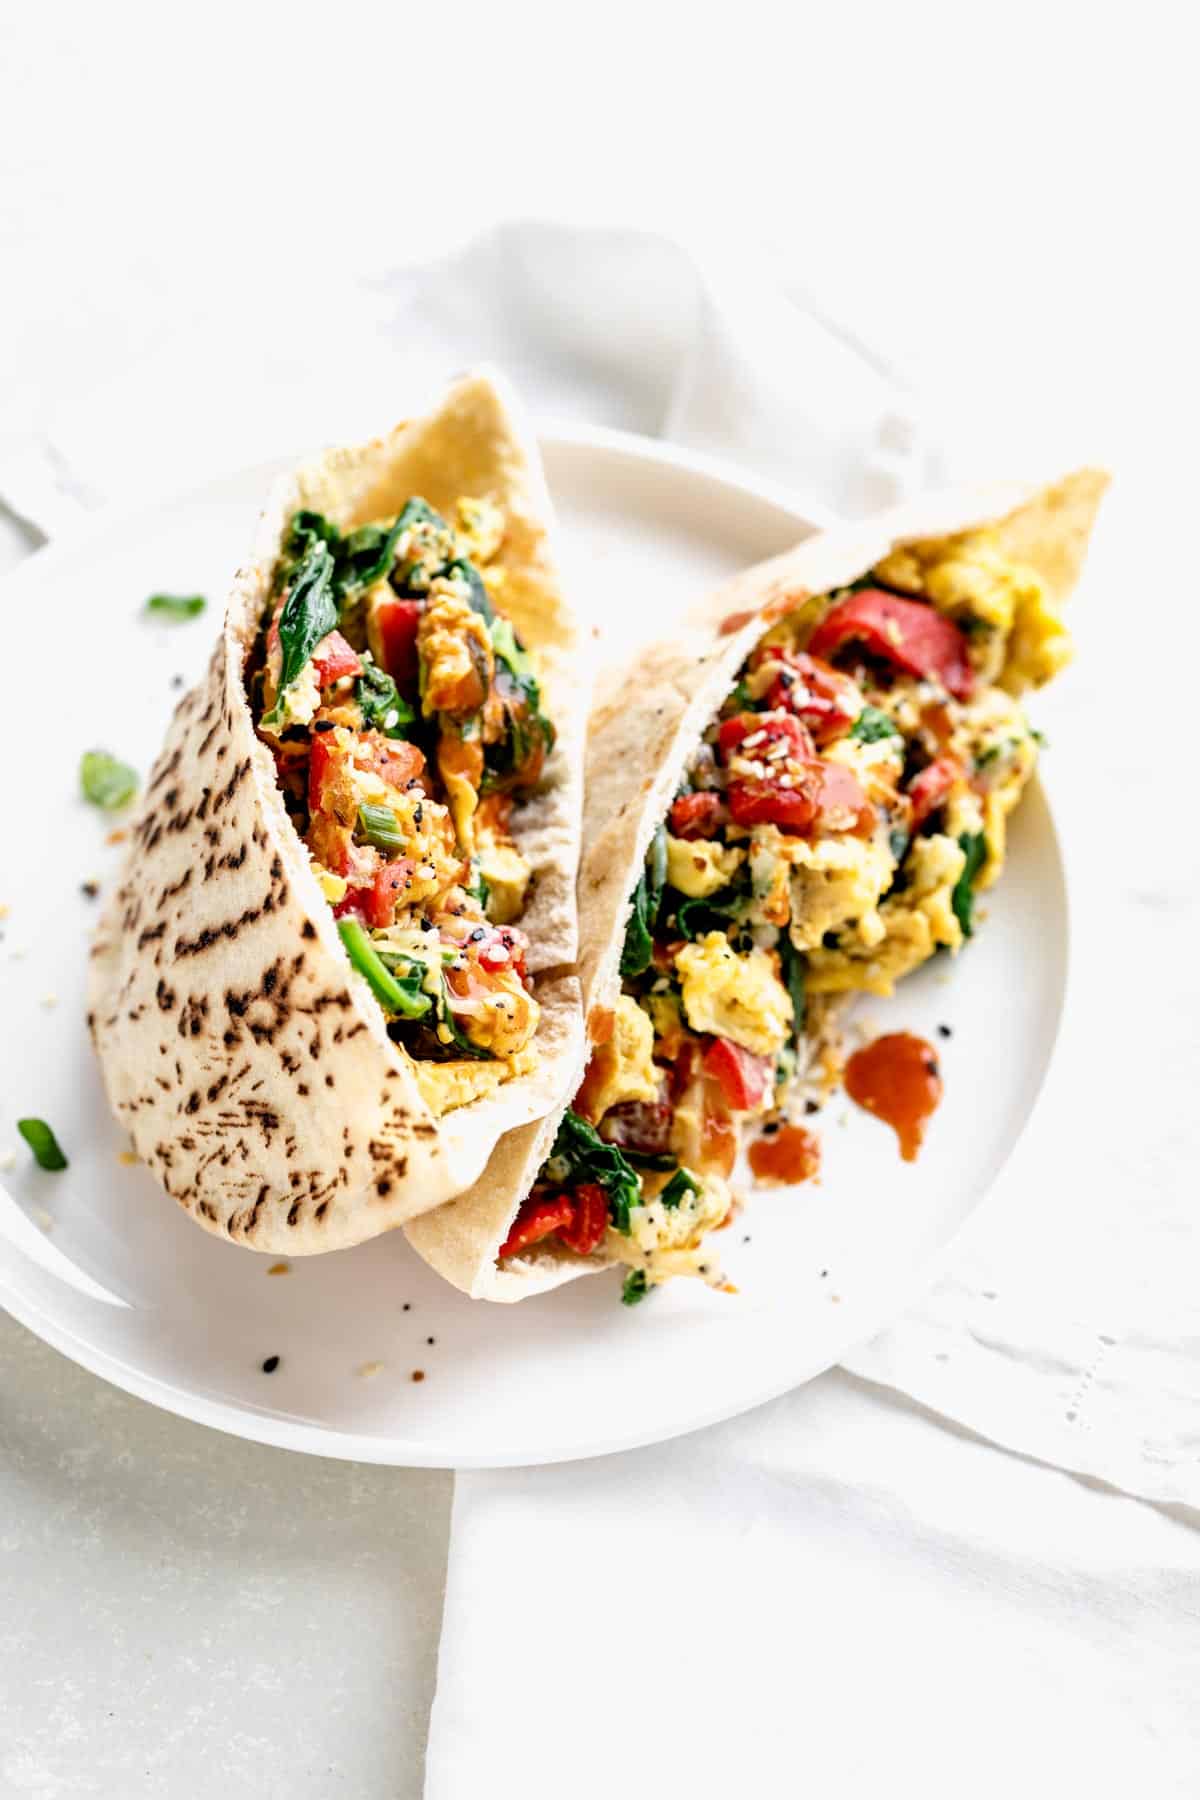 Two high protein breakfast burritos with spinach and eggs on a plate.